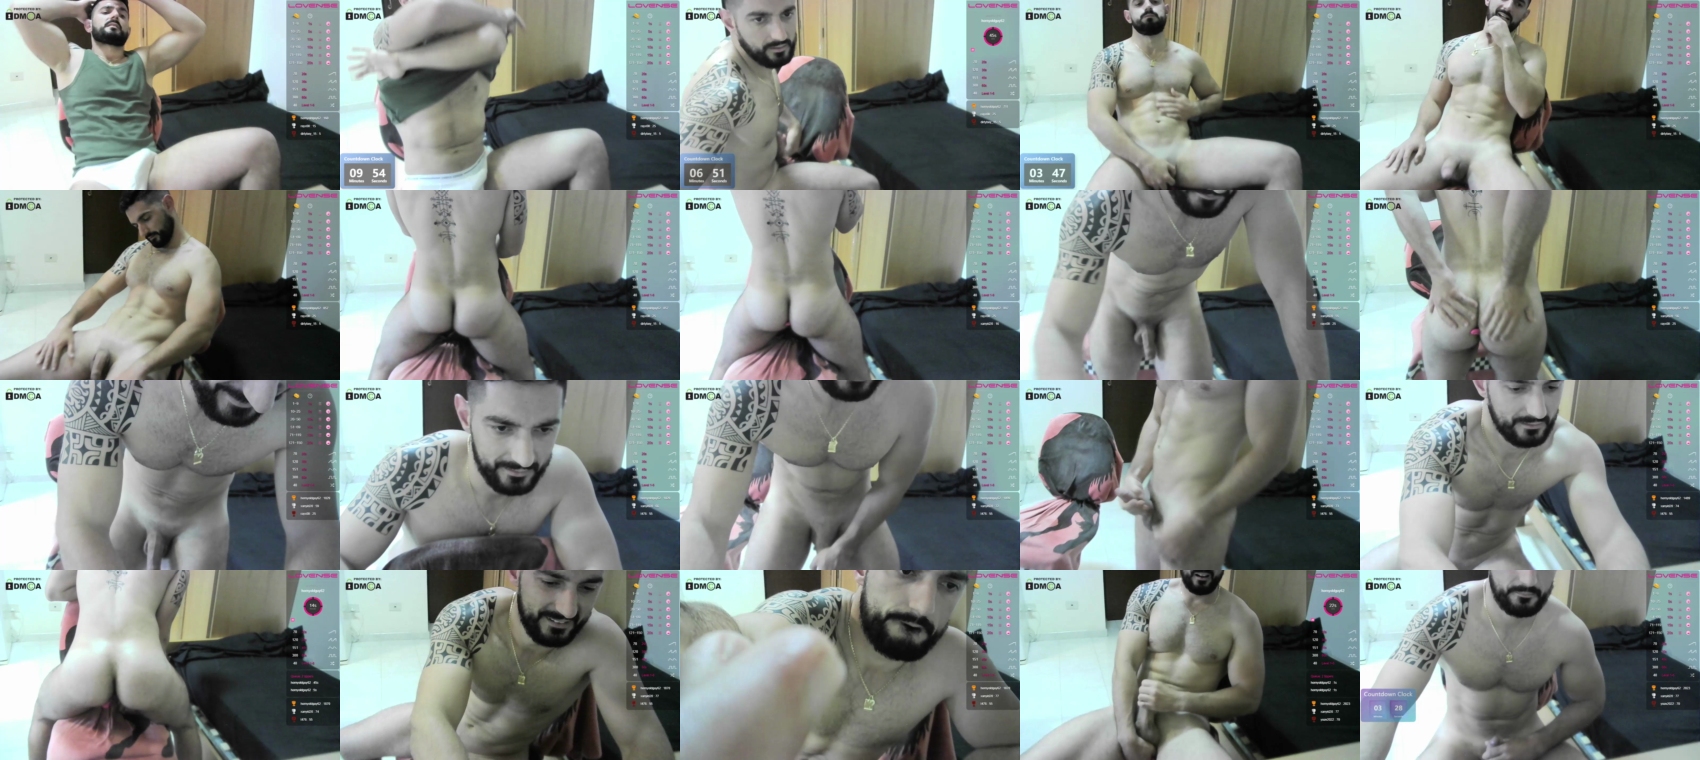 ricky_muscle_1993 fuck CAM SHOW @ Chaturbate 29-05-2022